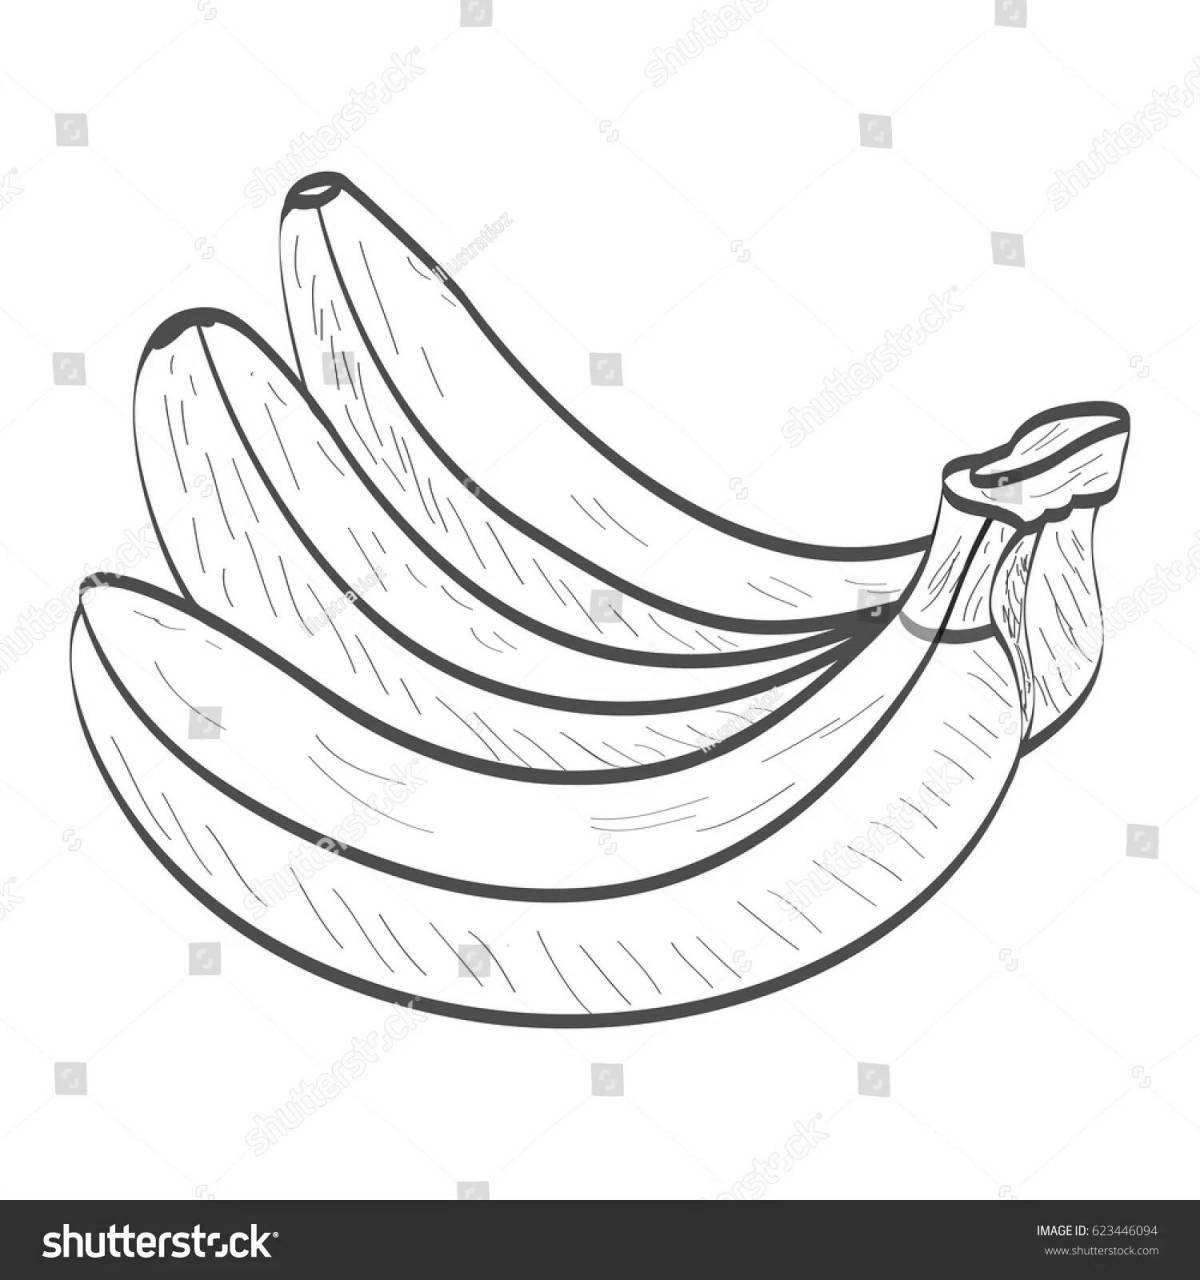 Playful banana coloring book for 3-4 year olds